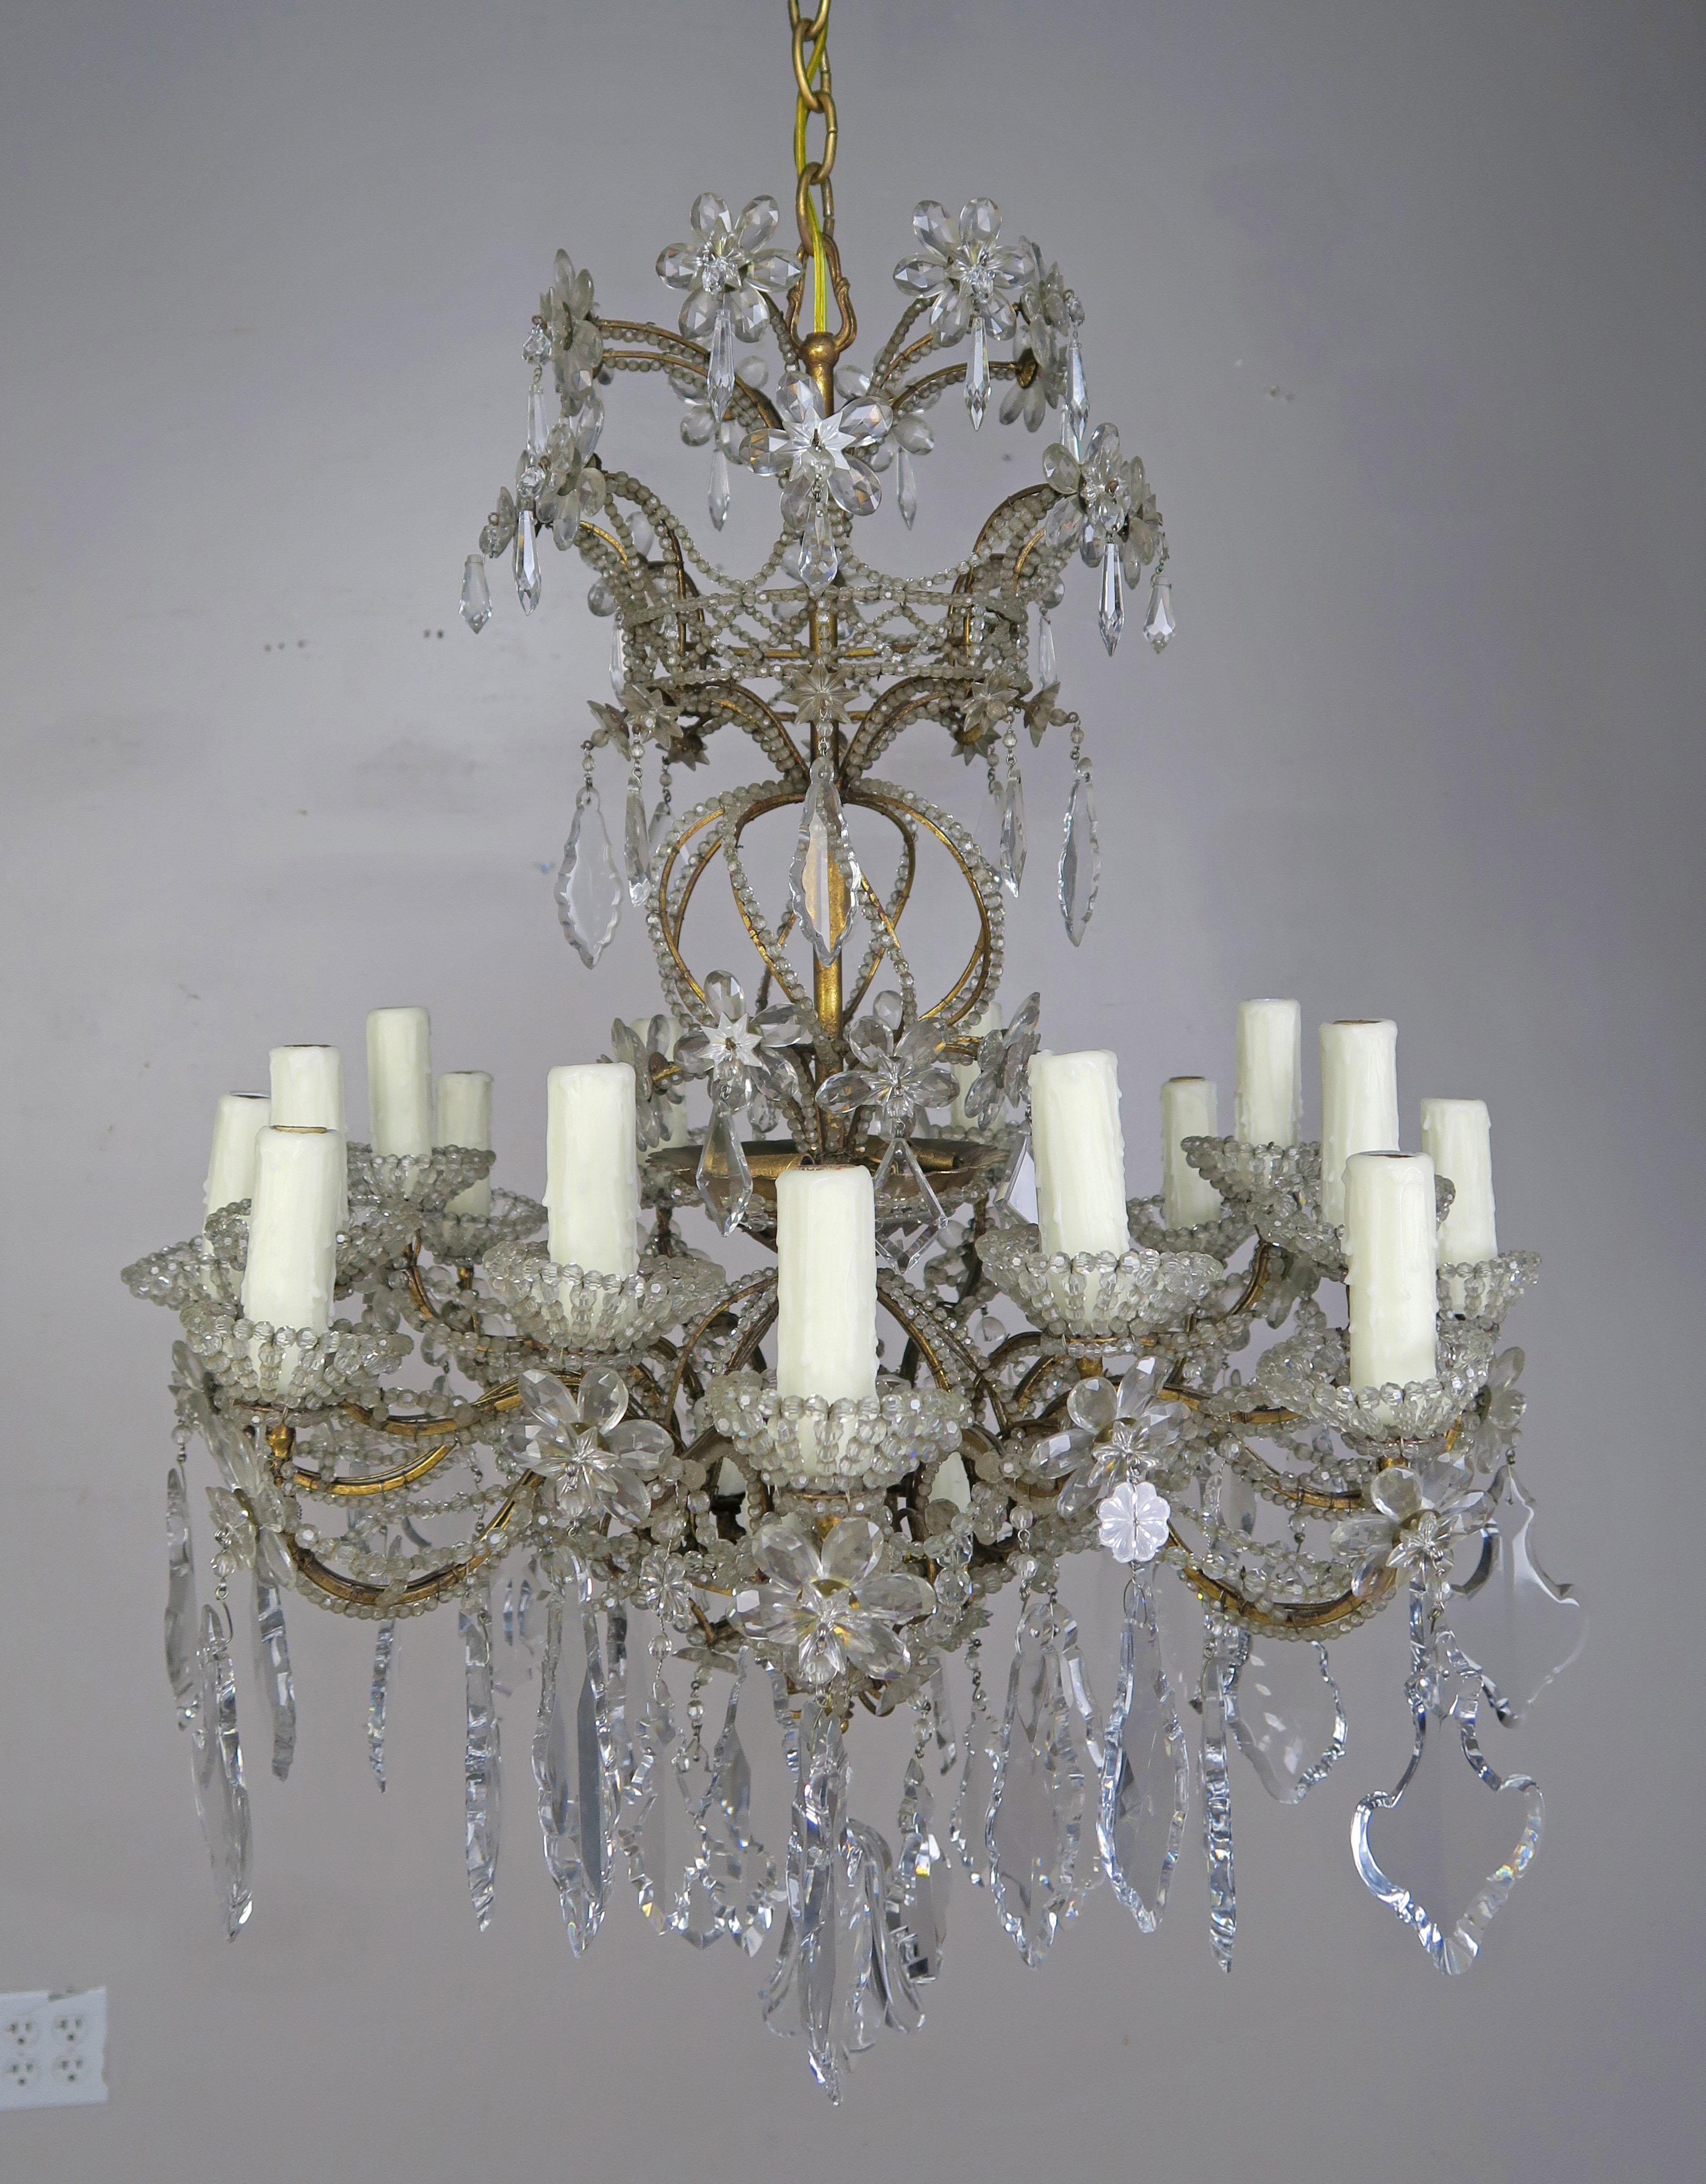 20-light Italian crystal beaded chandelier with crystal flowers and etched crystals throughout. The crystal beaded body of the fixture swirls up into a large bouquet of crystal flowers. The chandelier is adorned with star etched crystals in various